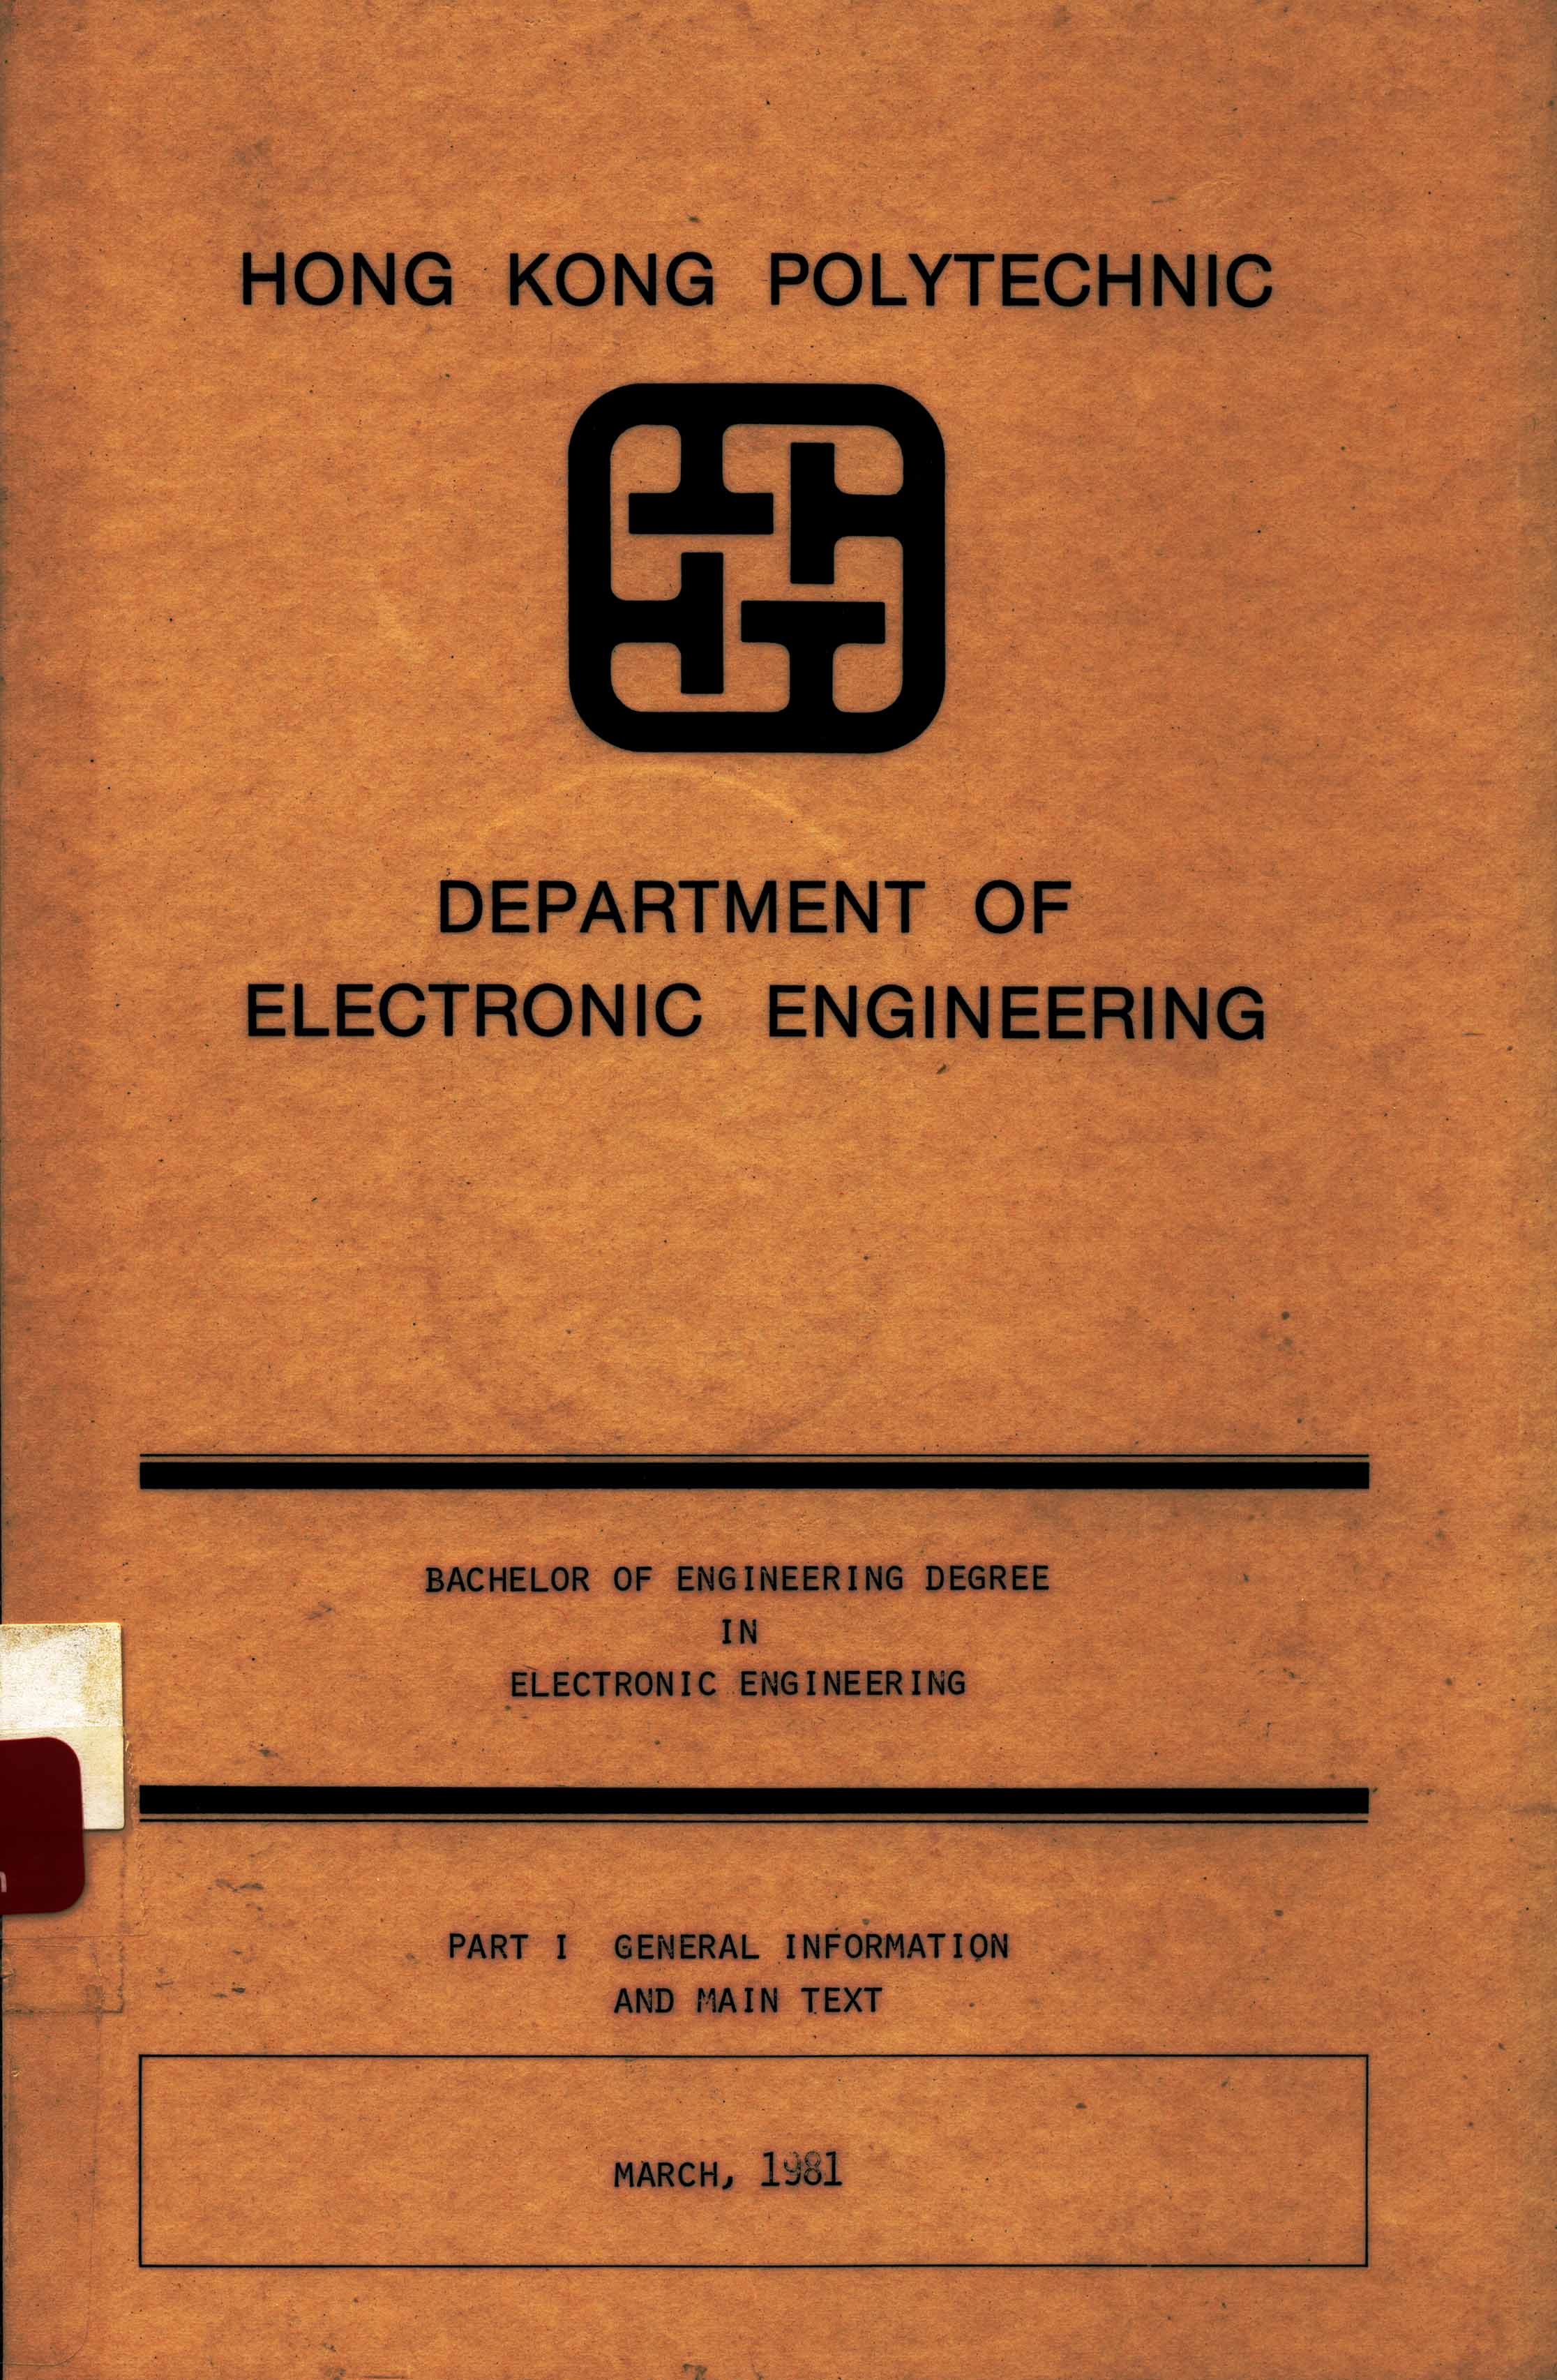 Bachelor of Engineering degree in Electronic Engineering. Part I - General Information and Main Text